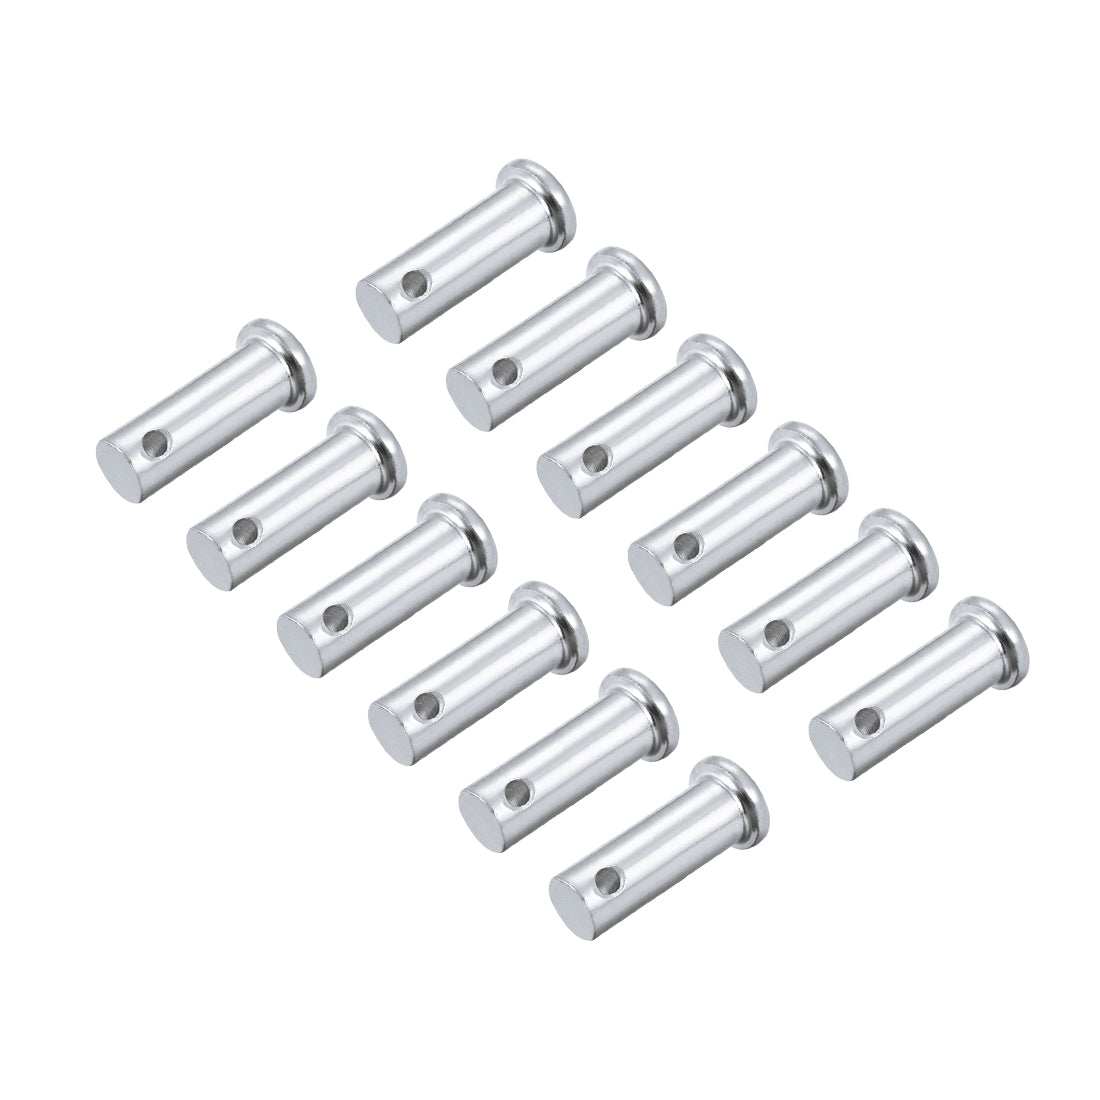 uxcell Uxcell Single Hole Clevis Pins -  Flat Head Zinc-Plating Solid Steel Link Hinge Pin 12Pcs